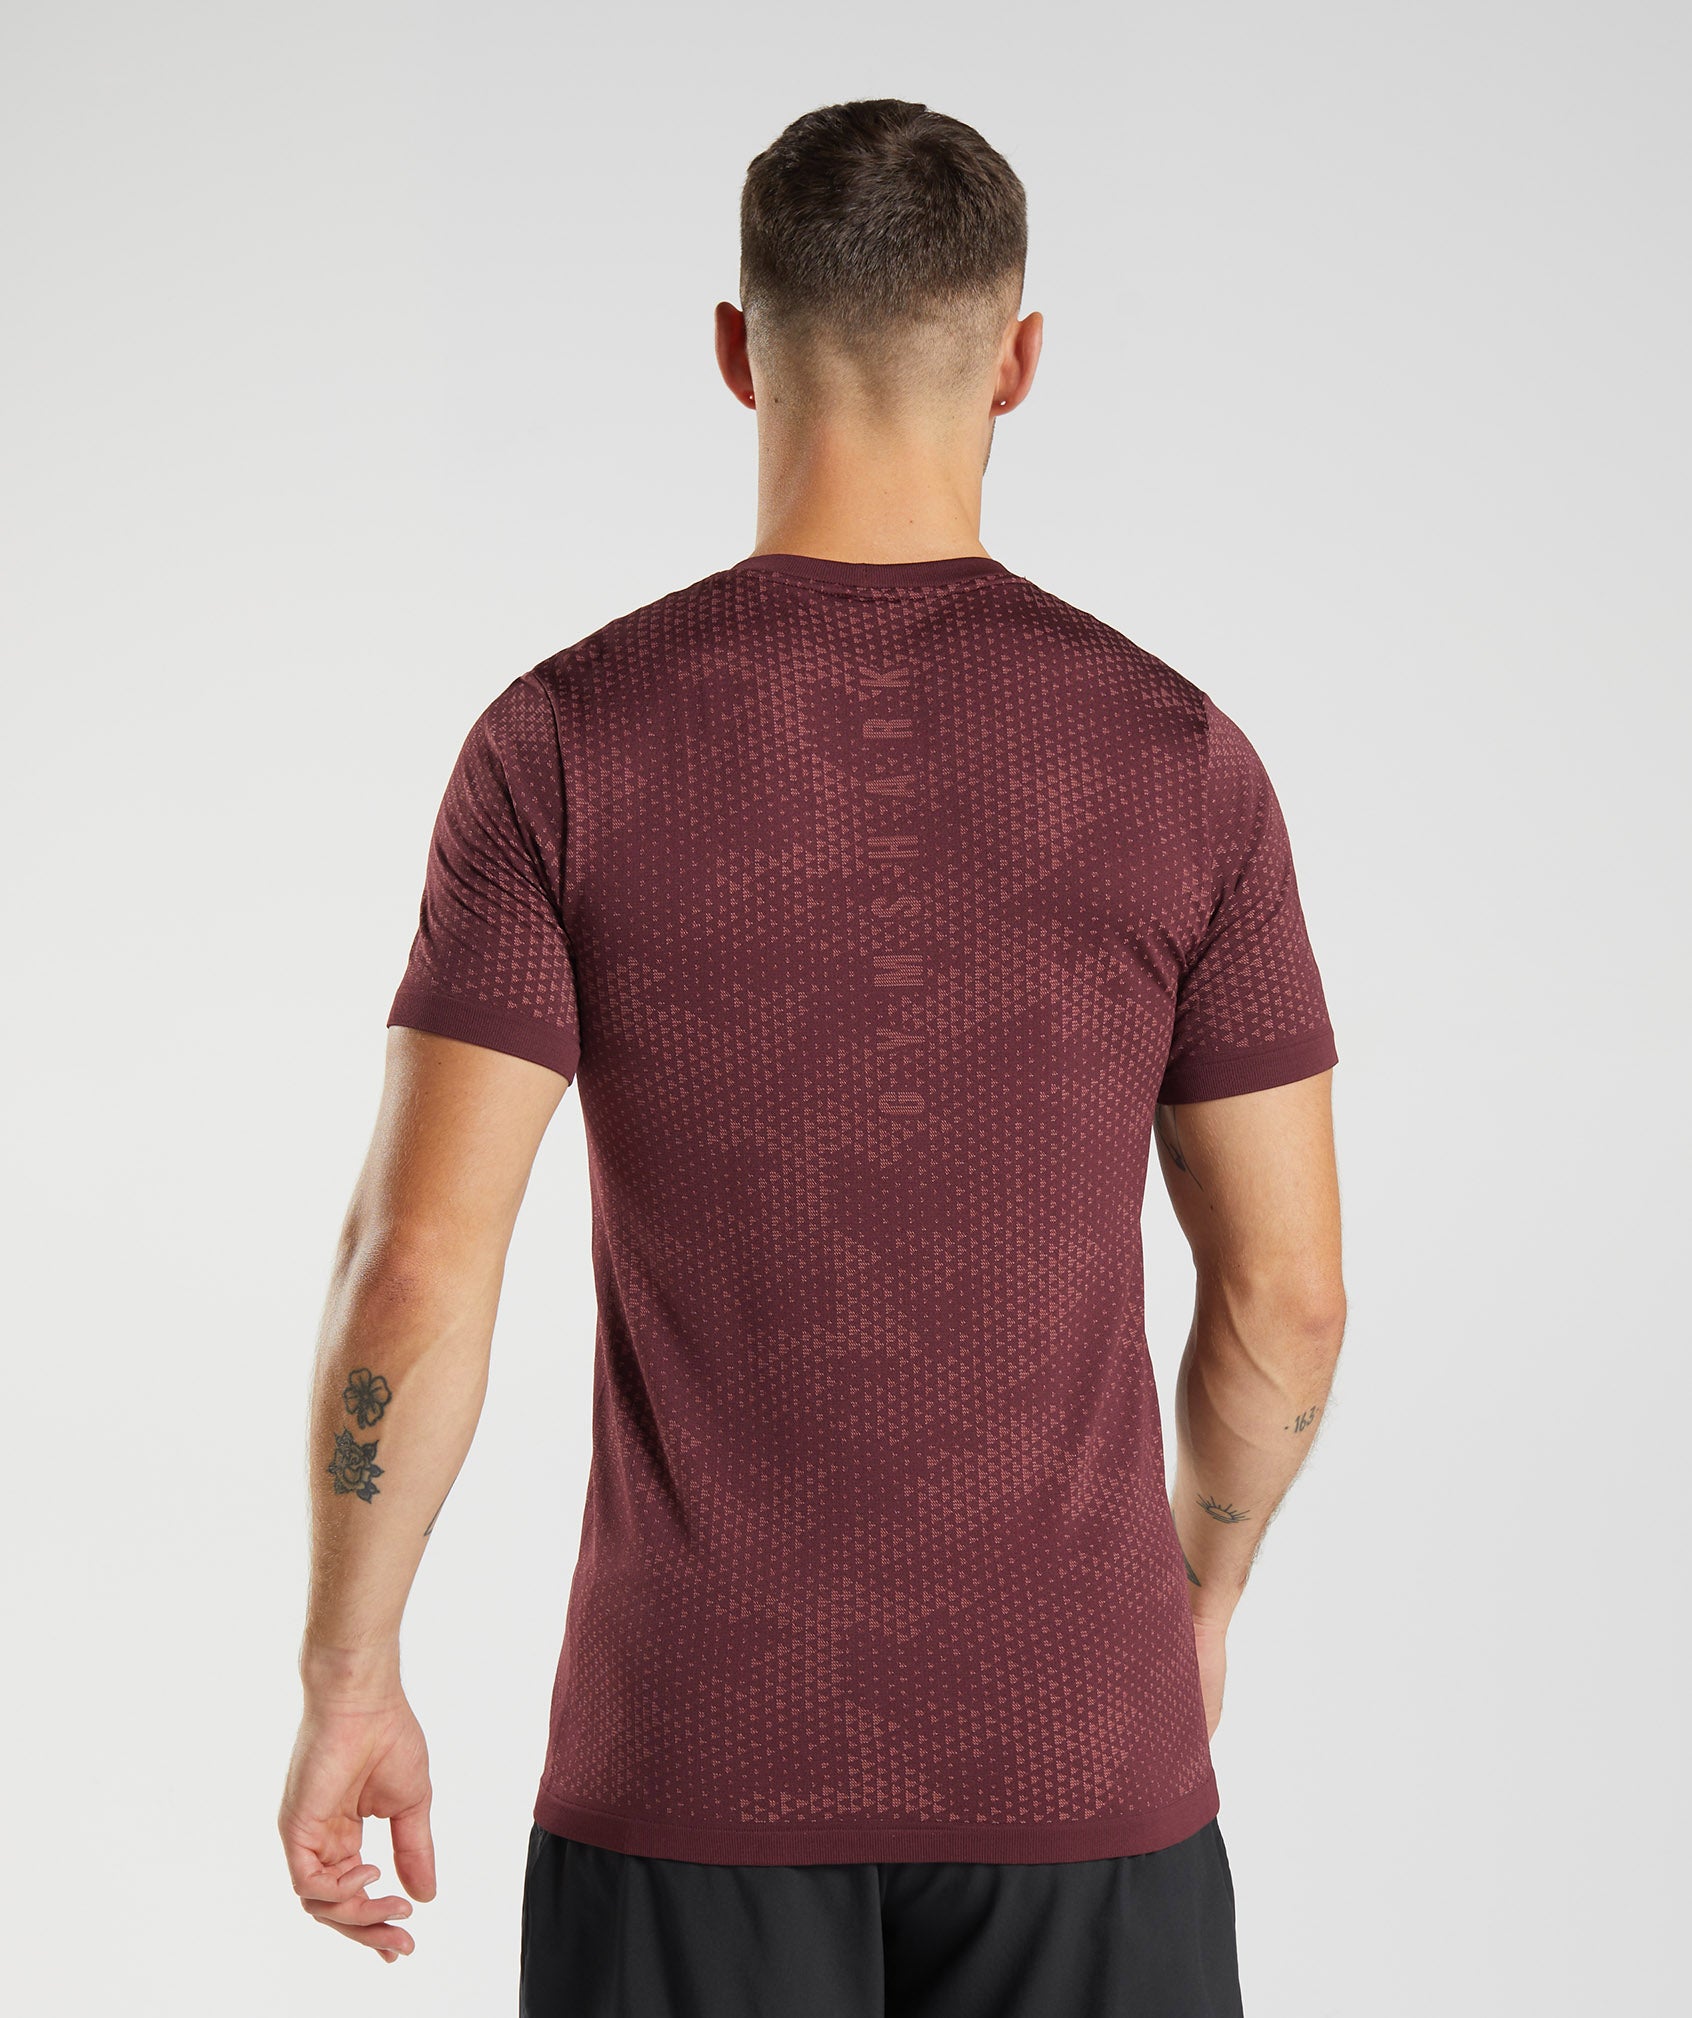 Sport Seamless T-Shirt in Baked Maroon/Rosewood Red - view 2